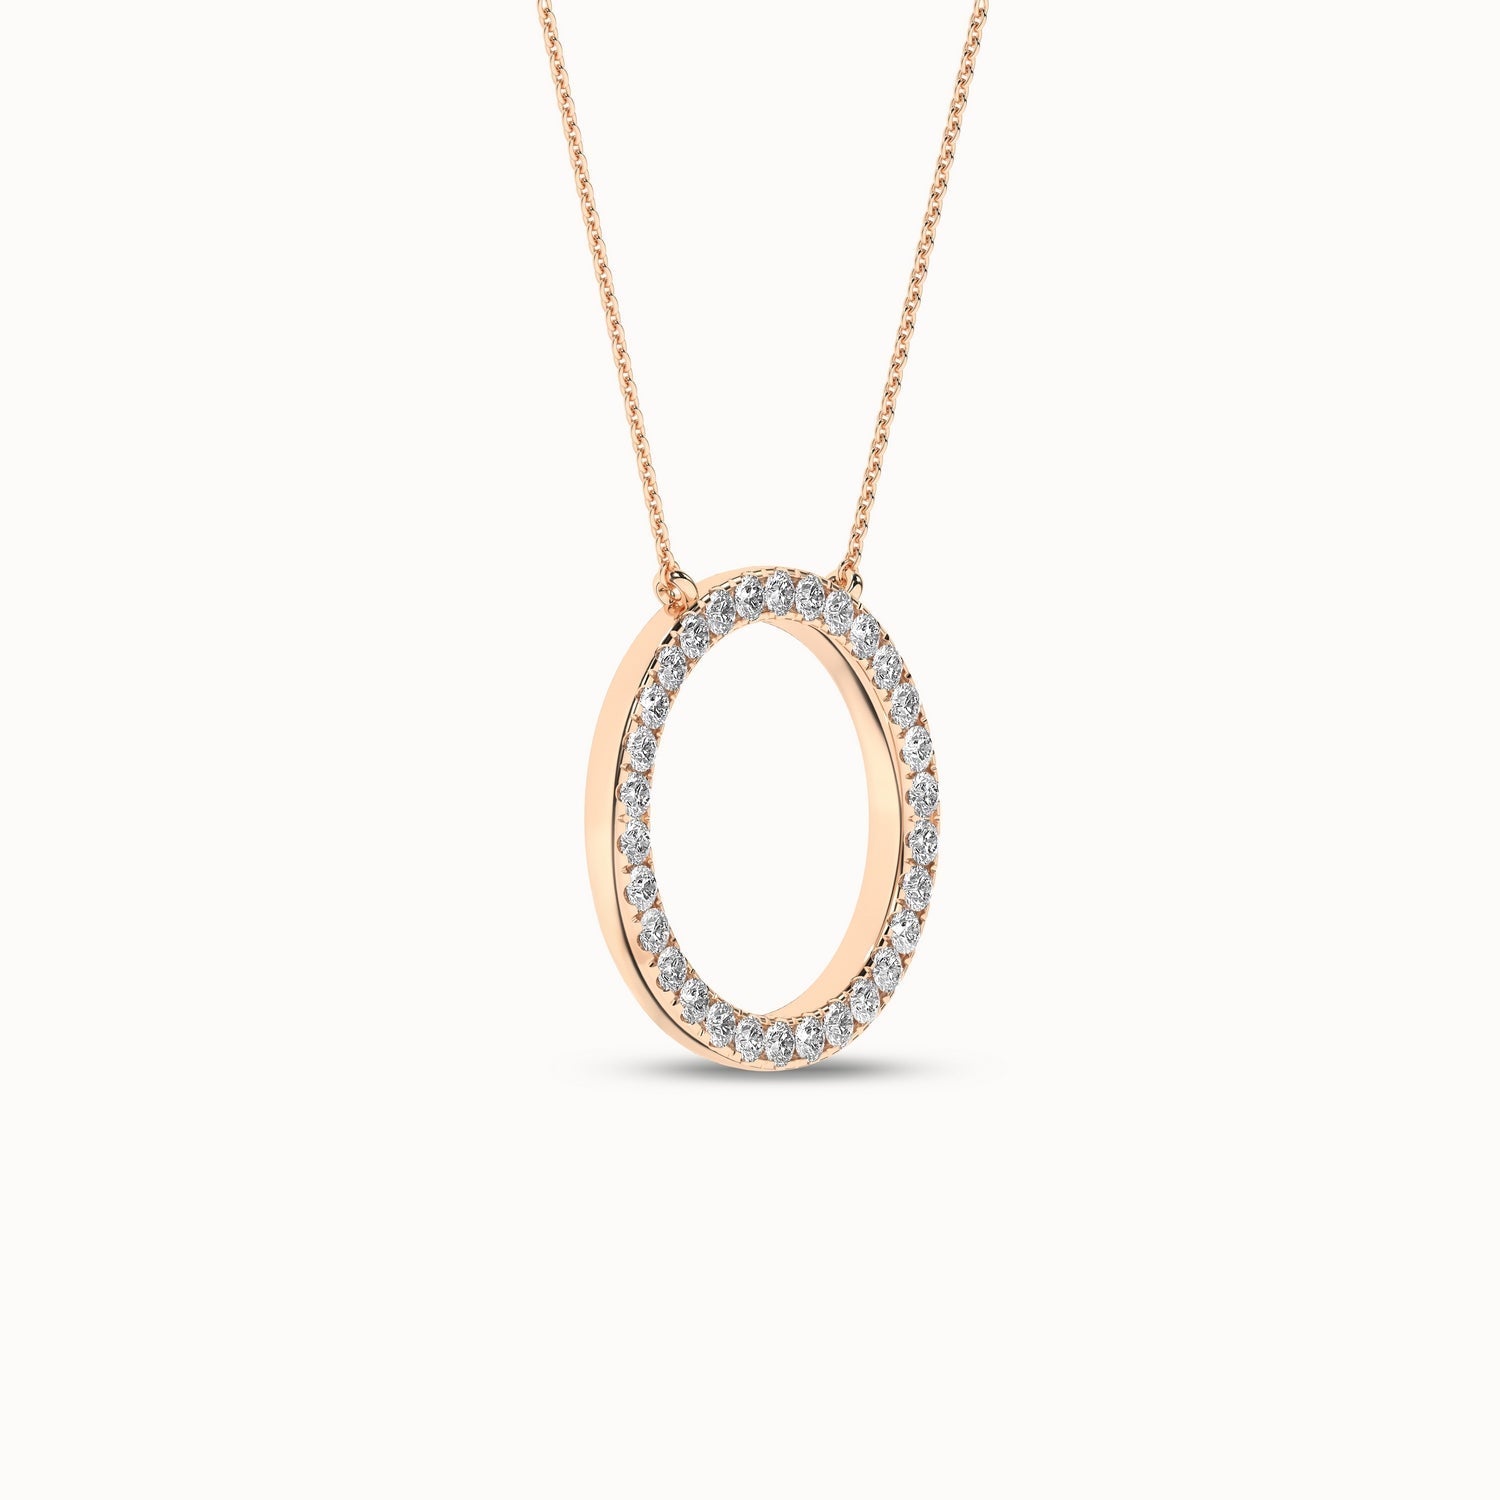 Circular Silhouette Necklace_Product Angle_1/3Ct. - 2